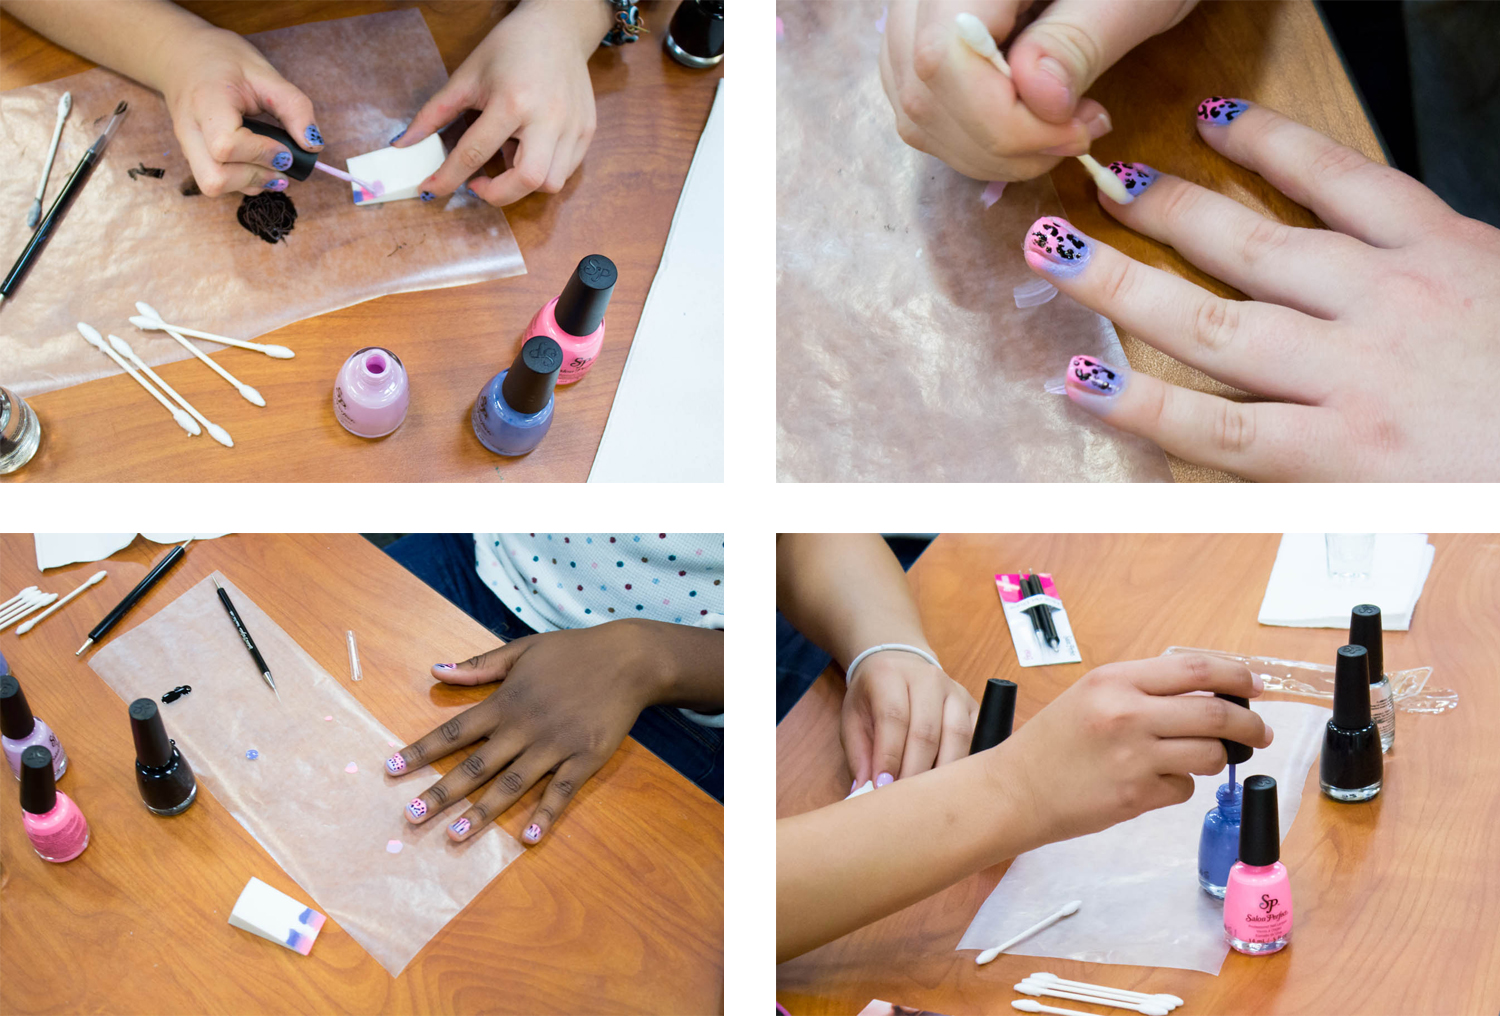 The Nail Art Workshop - wide 2